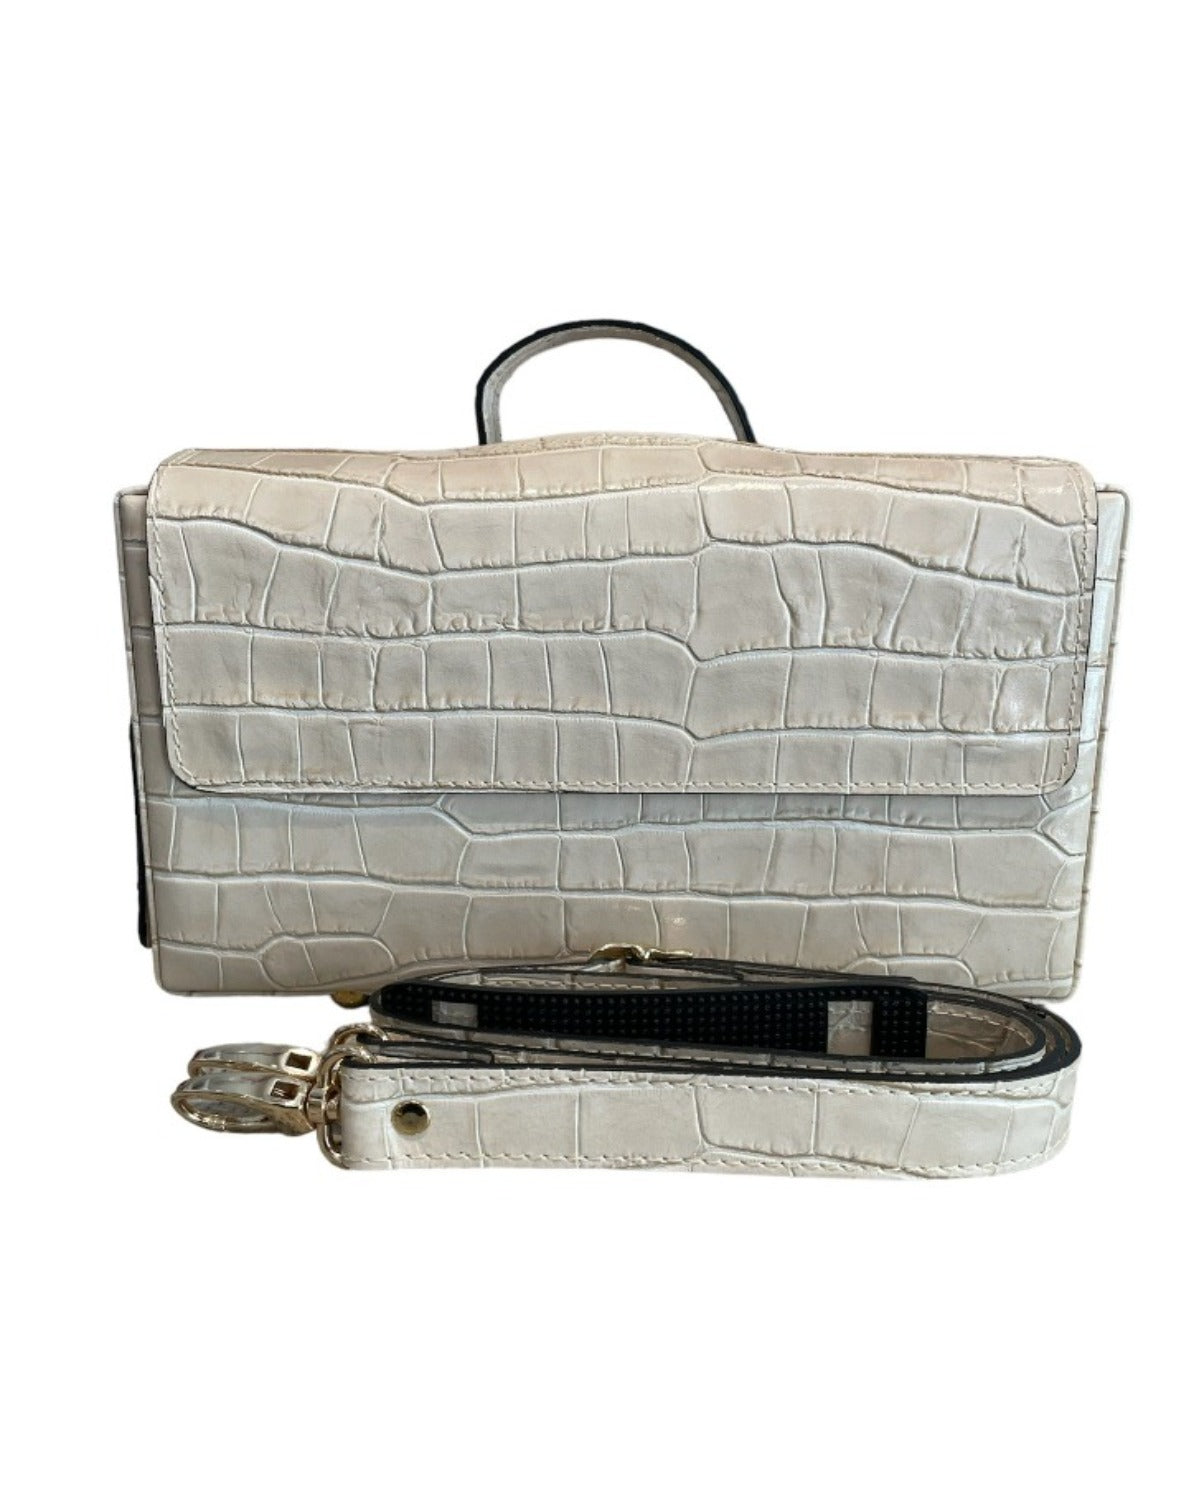 Classic Briefcase CREAM COCCO PRINT Leather with locks and shoulder strap